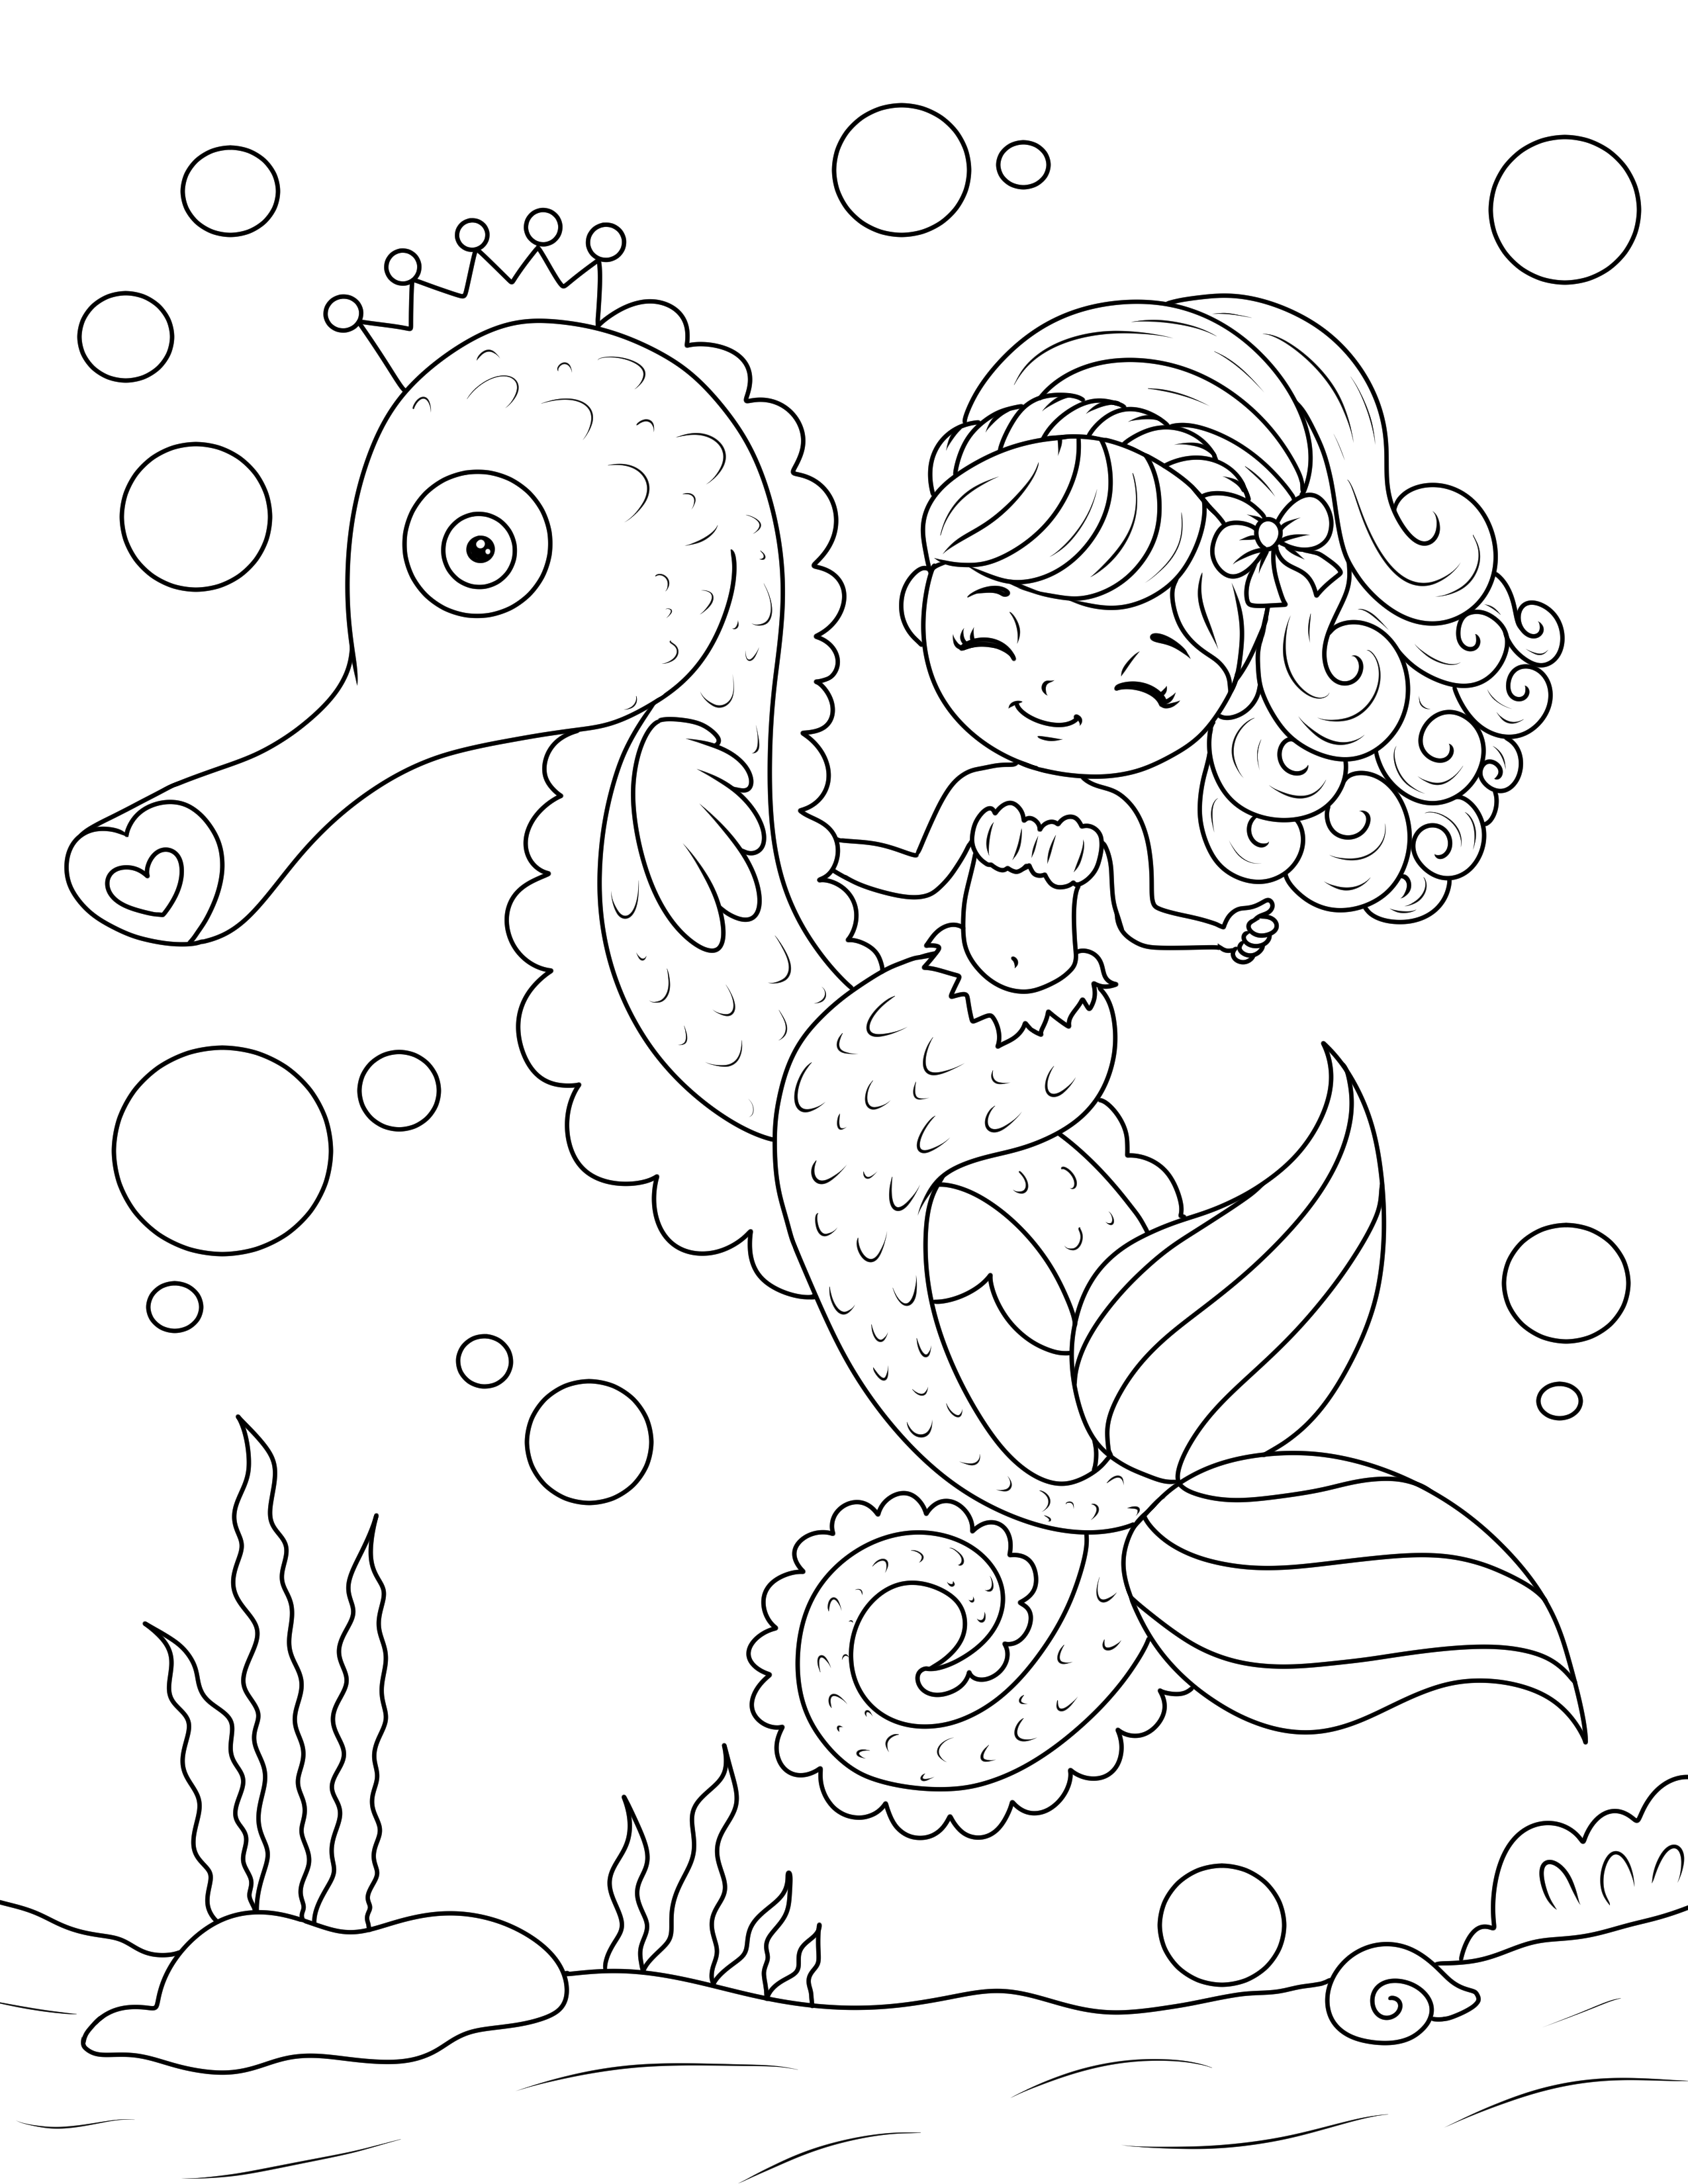 Mermaid on a Seahorse Coloring Page - Activity Party